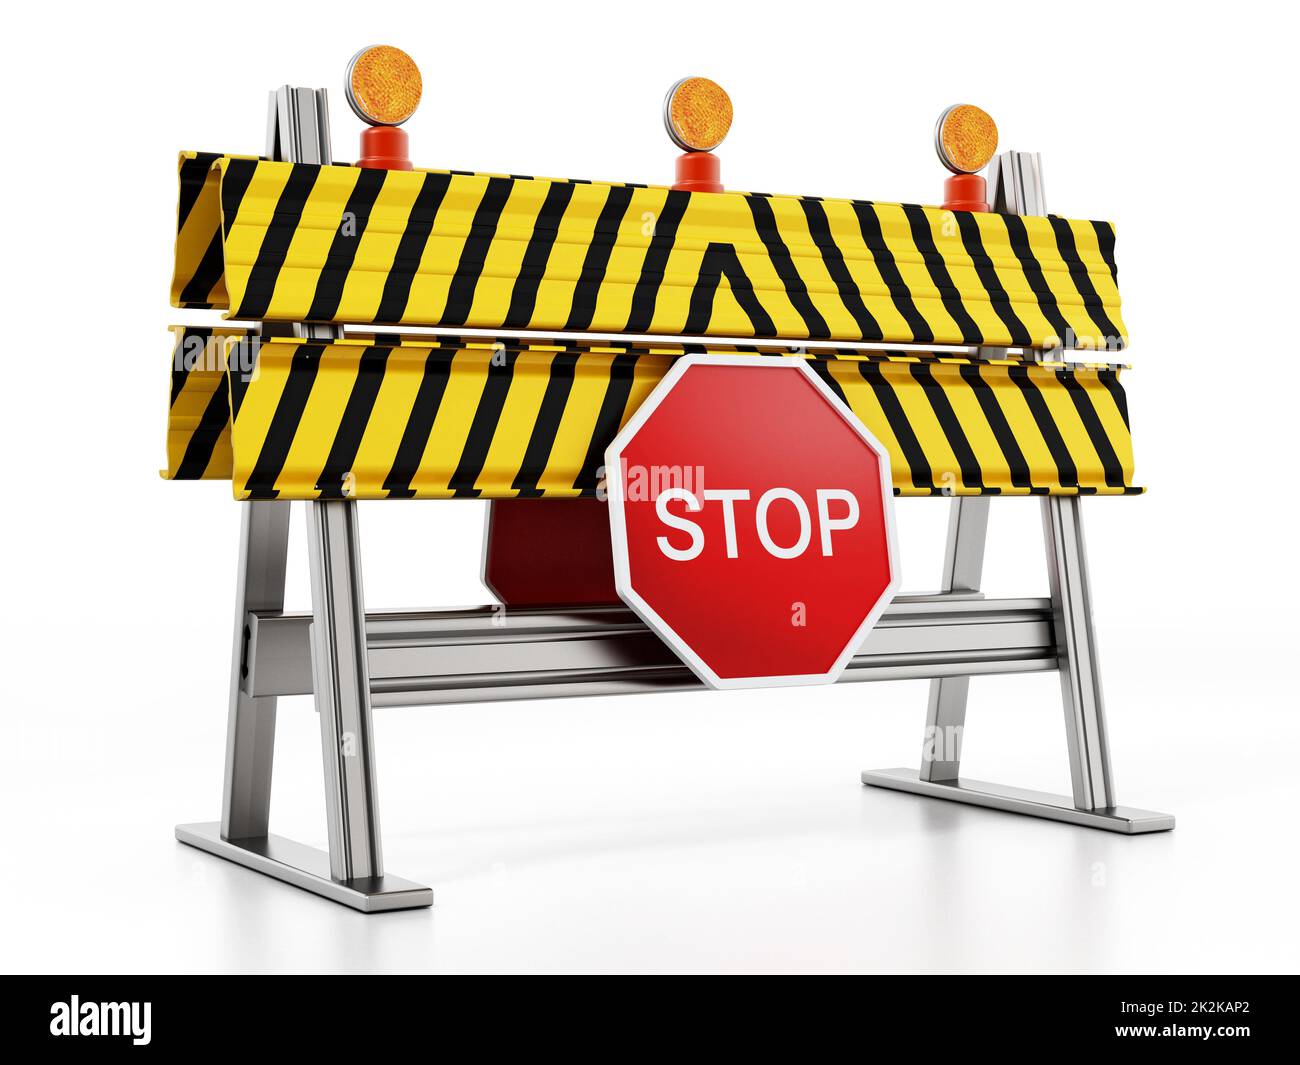 Road block with stop sign isolated on white background. 3D illustration Stock Photo